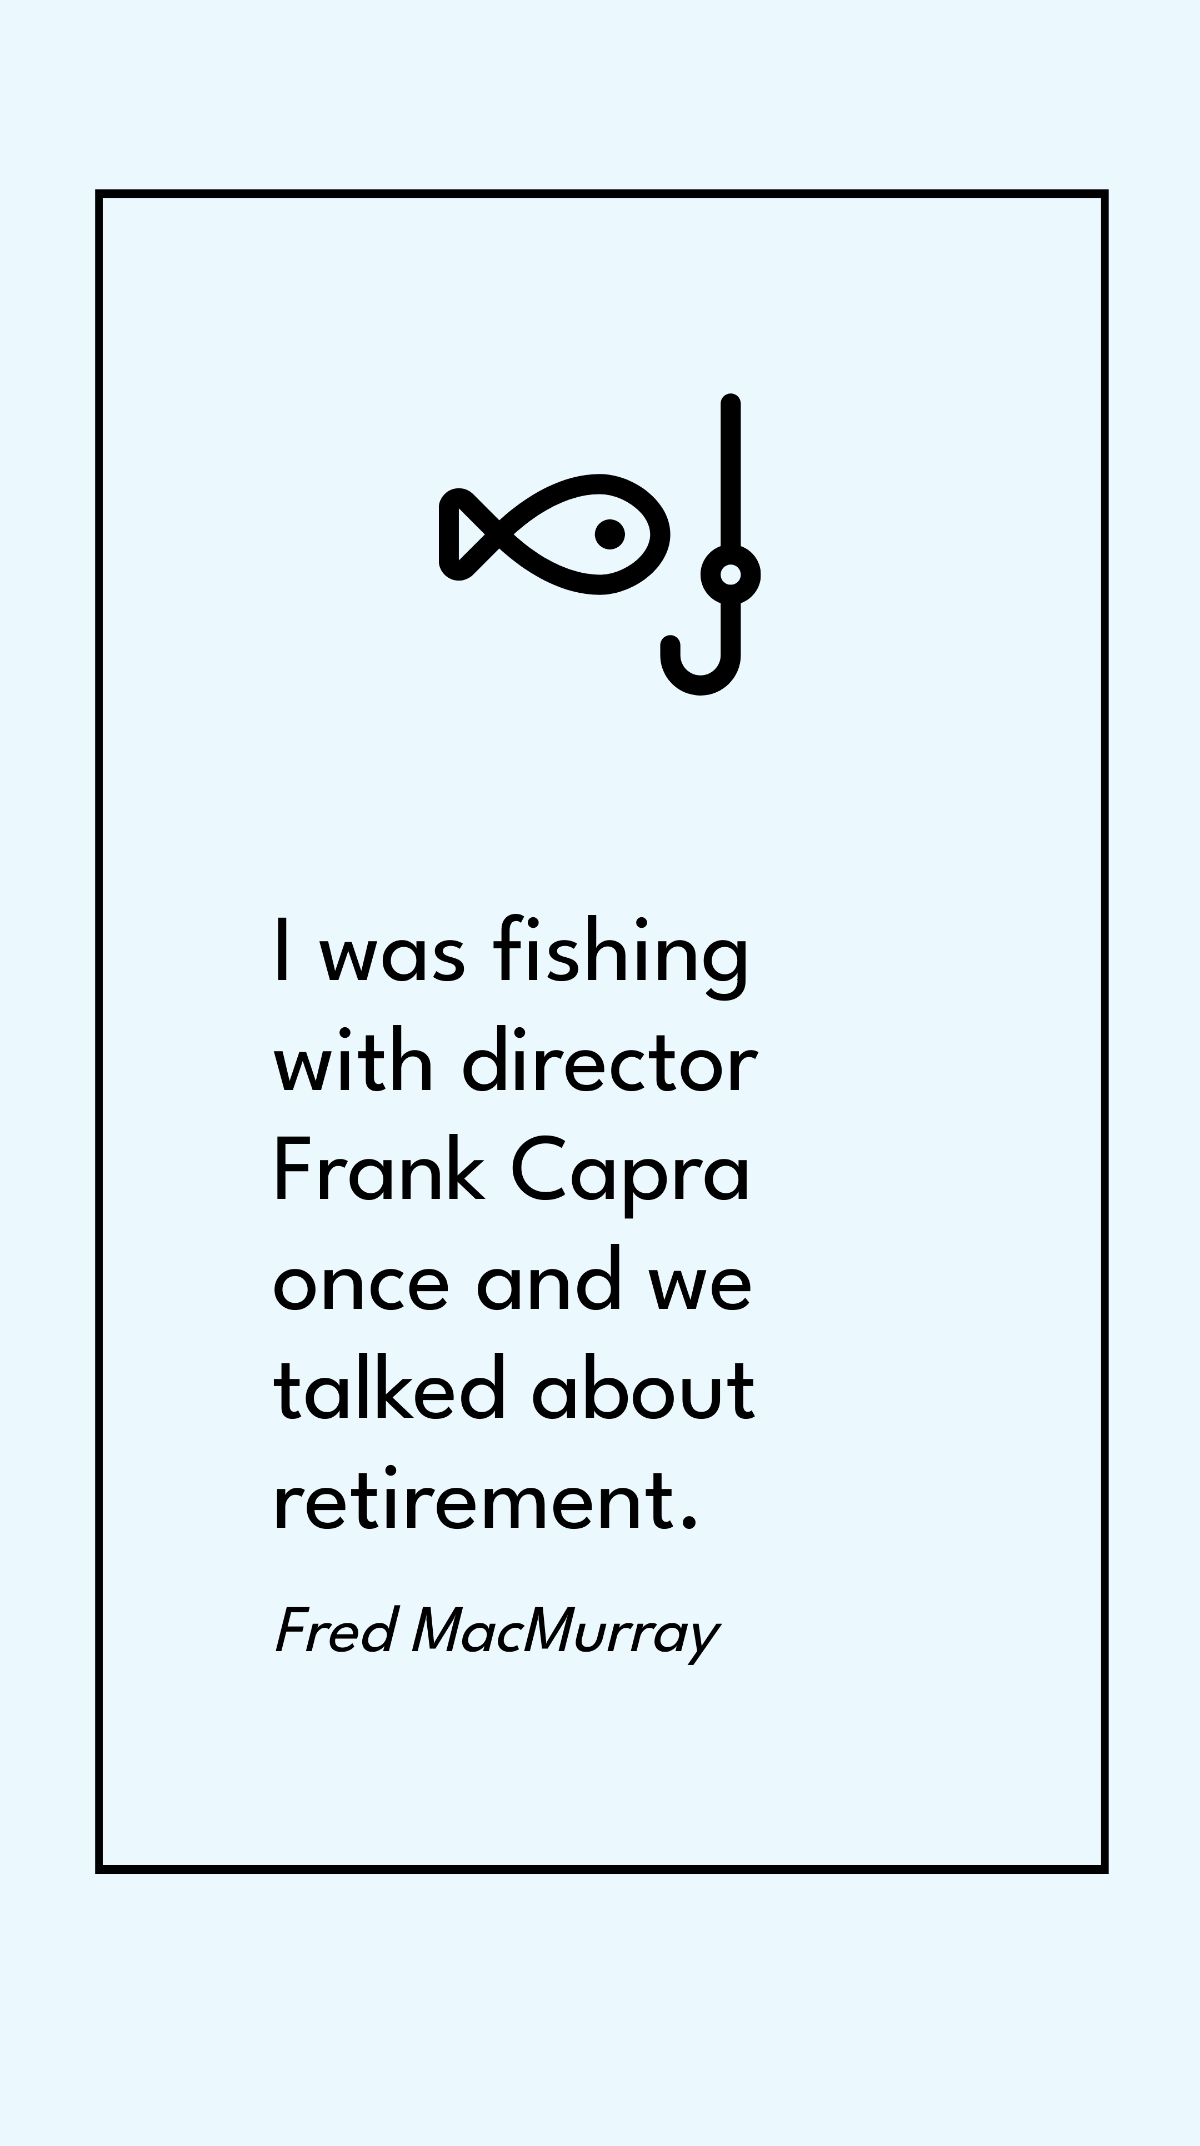 Fred MacMurray - I was fishing with director Frank Capra once and we talked about retirement. Template